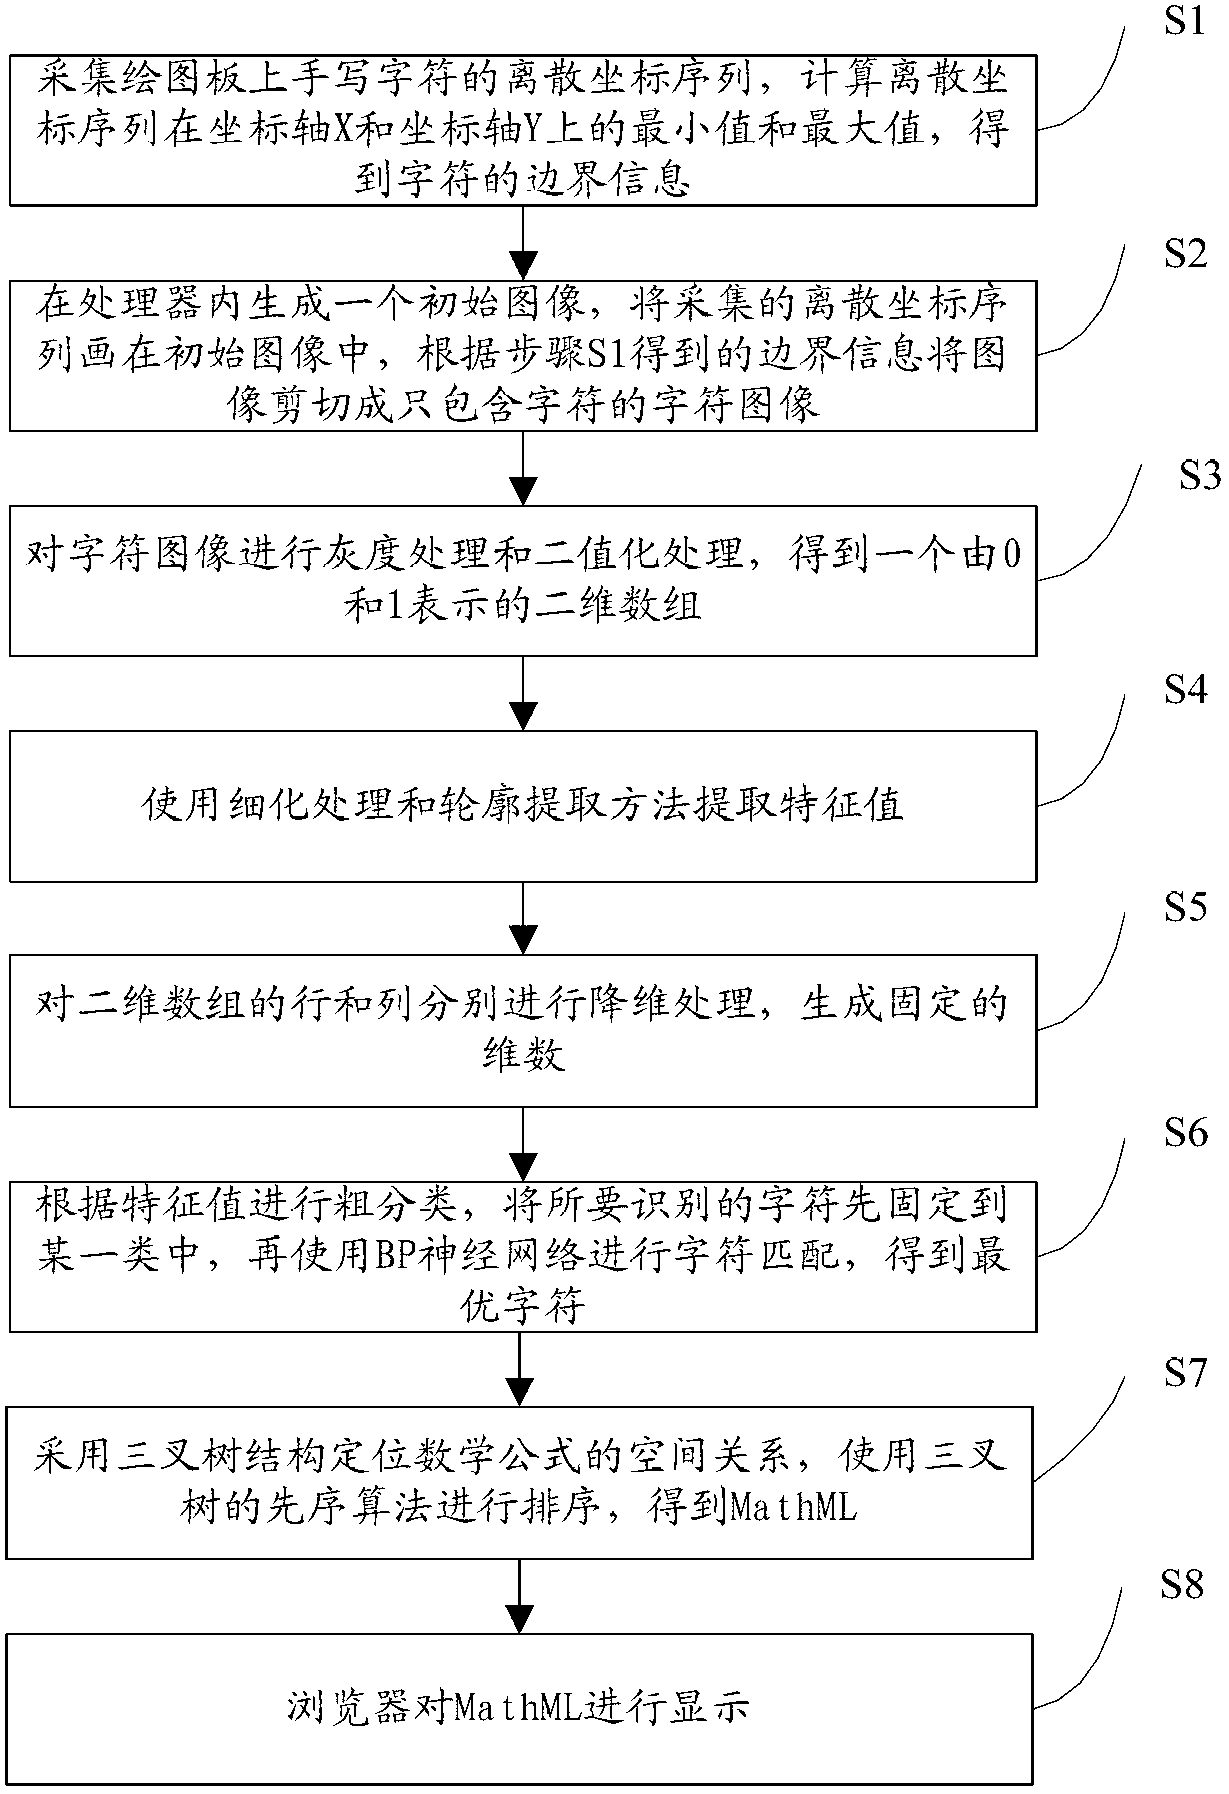 Method for recognizing handwritten mathematical formulas and generating MathML (mathematical makeup language) based on Android system